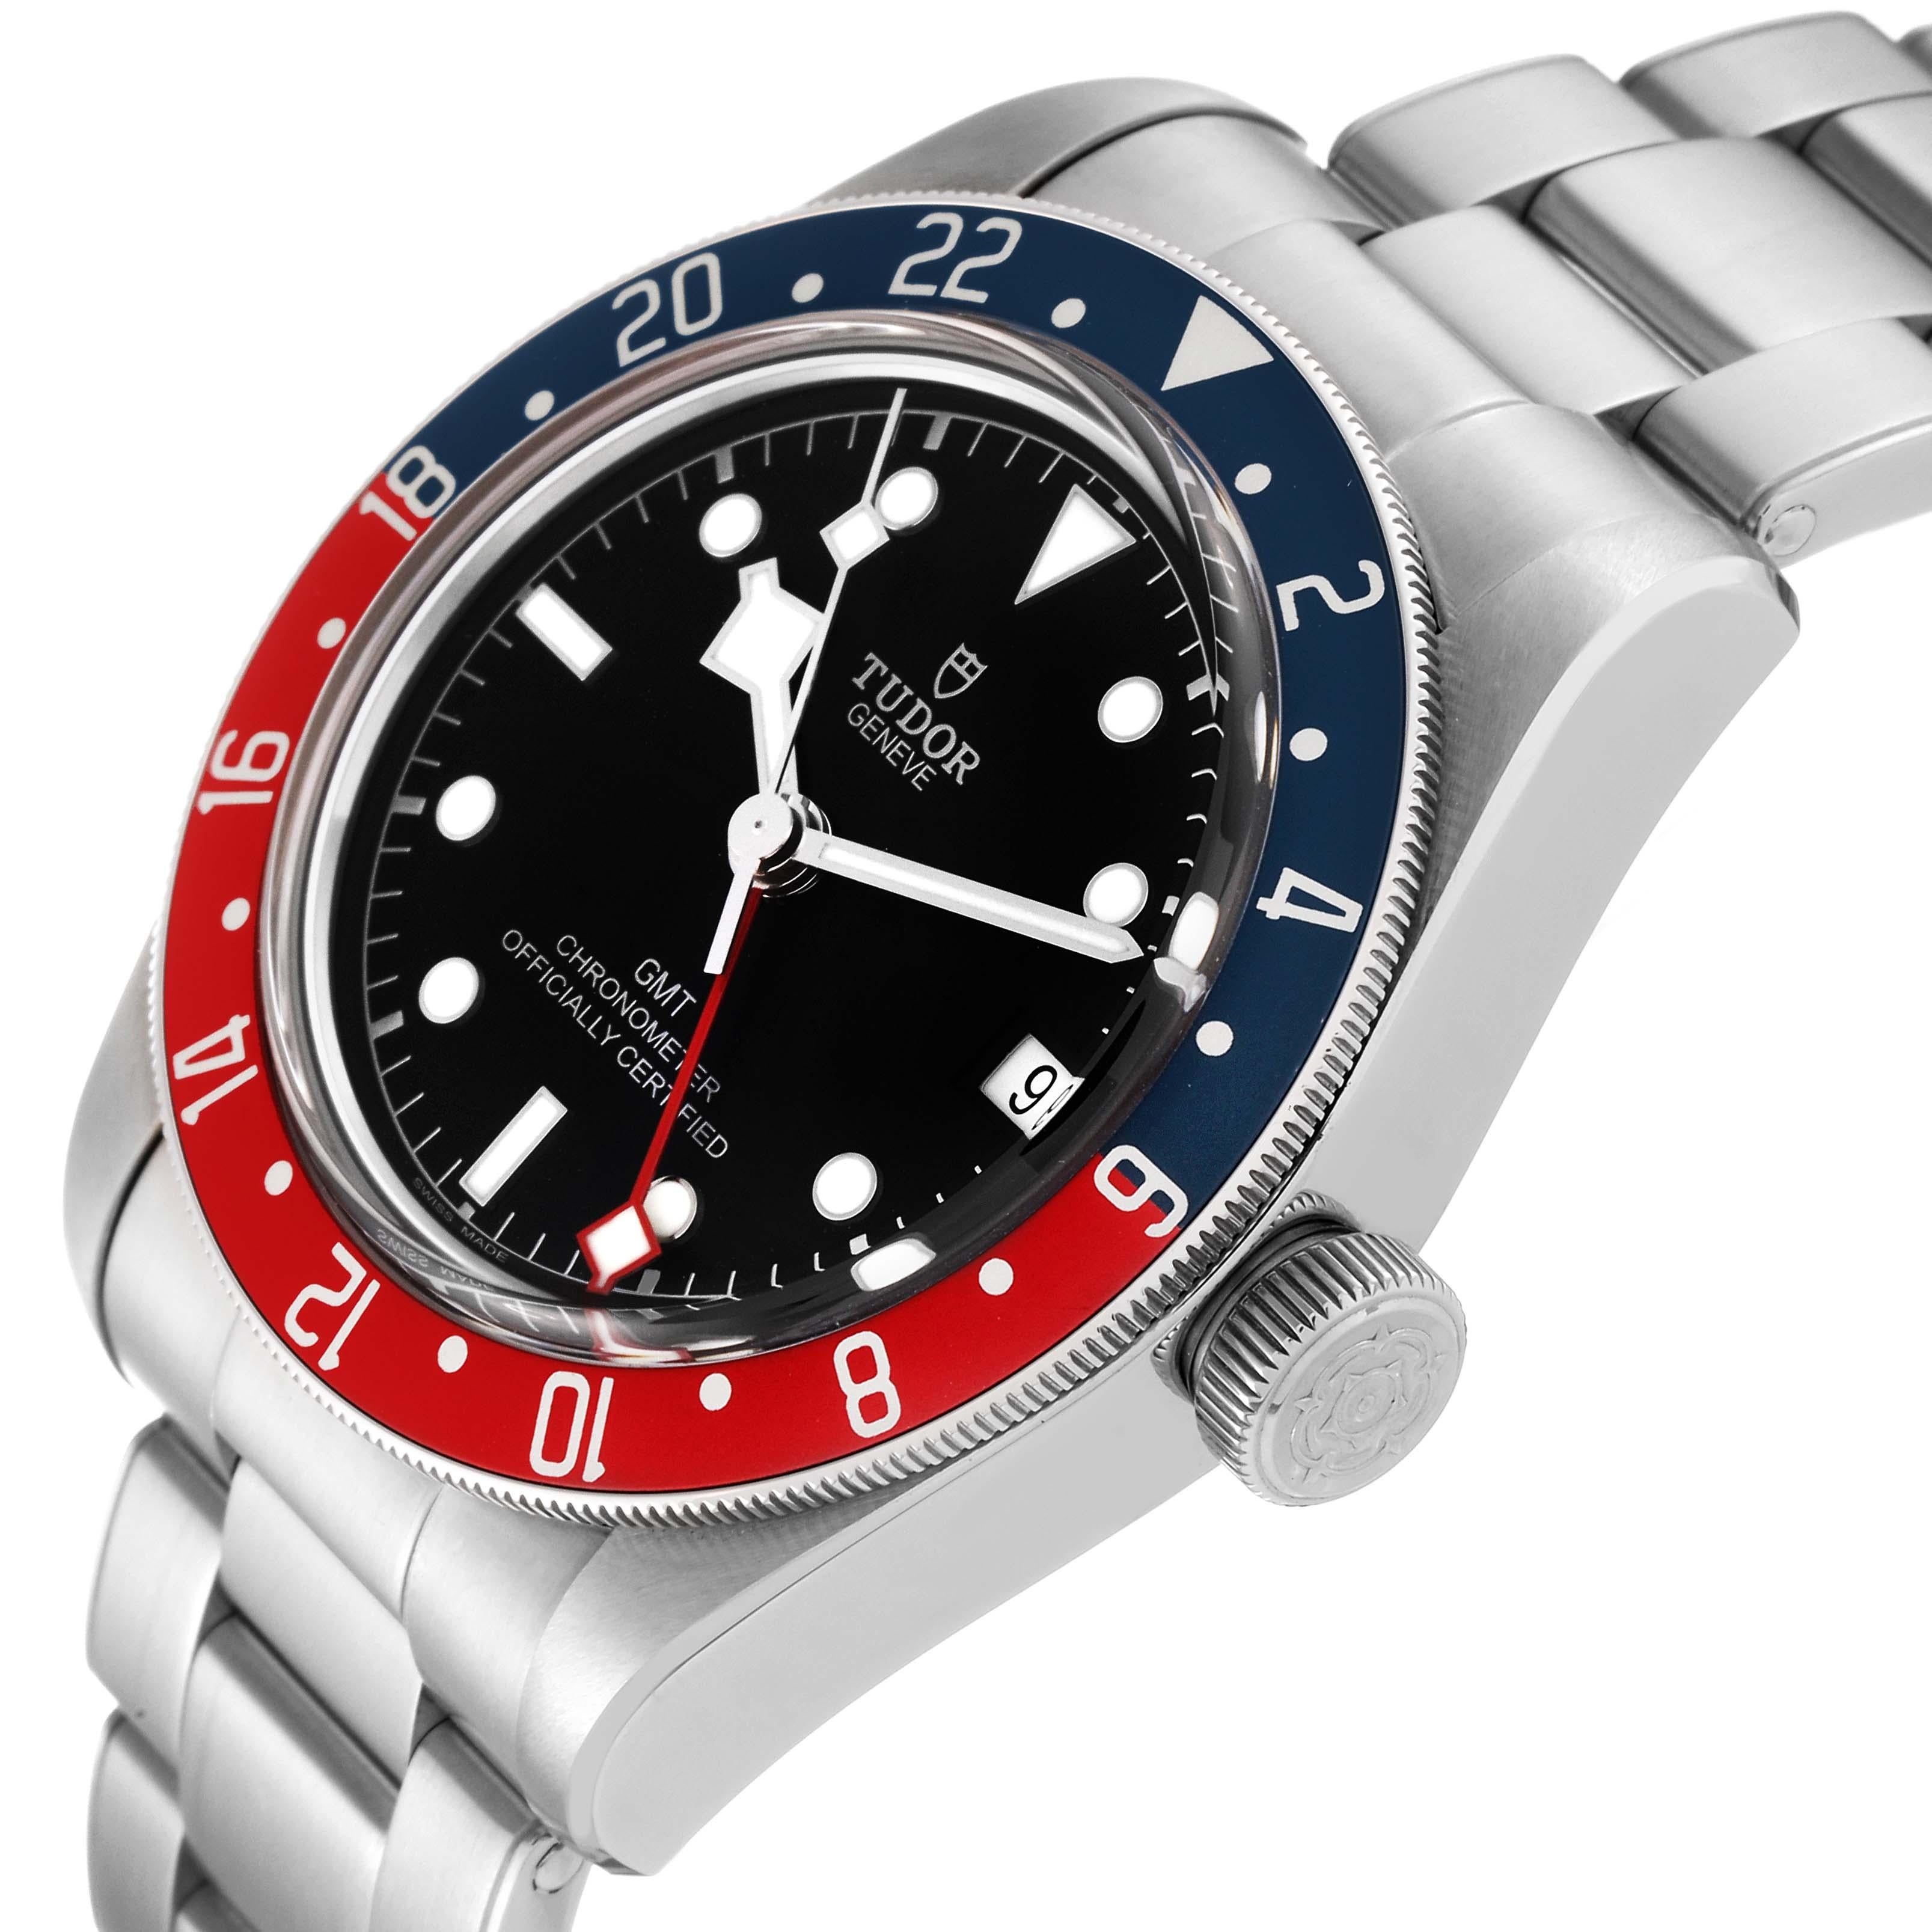 Tudor Heritage Black Bay GMT Pepsi Bezel Steel Mens Watch 79830RB Box Card. Automatic self-winding movement. Stainless steel oyster case 41.0 mm in diameter. Tudor logo on crown. Bidirectional rotating red and blue (Pepsi) bezel. Scratch resistant